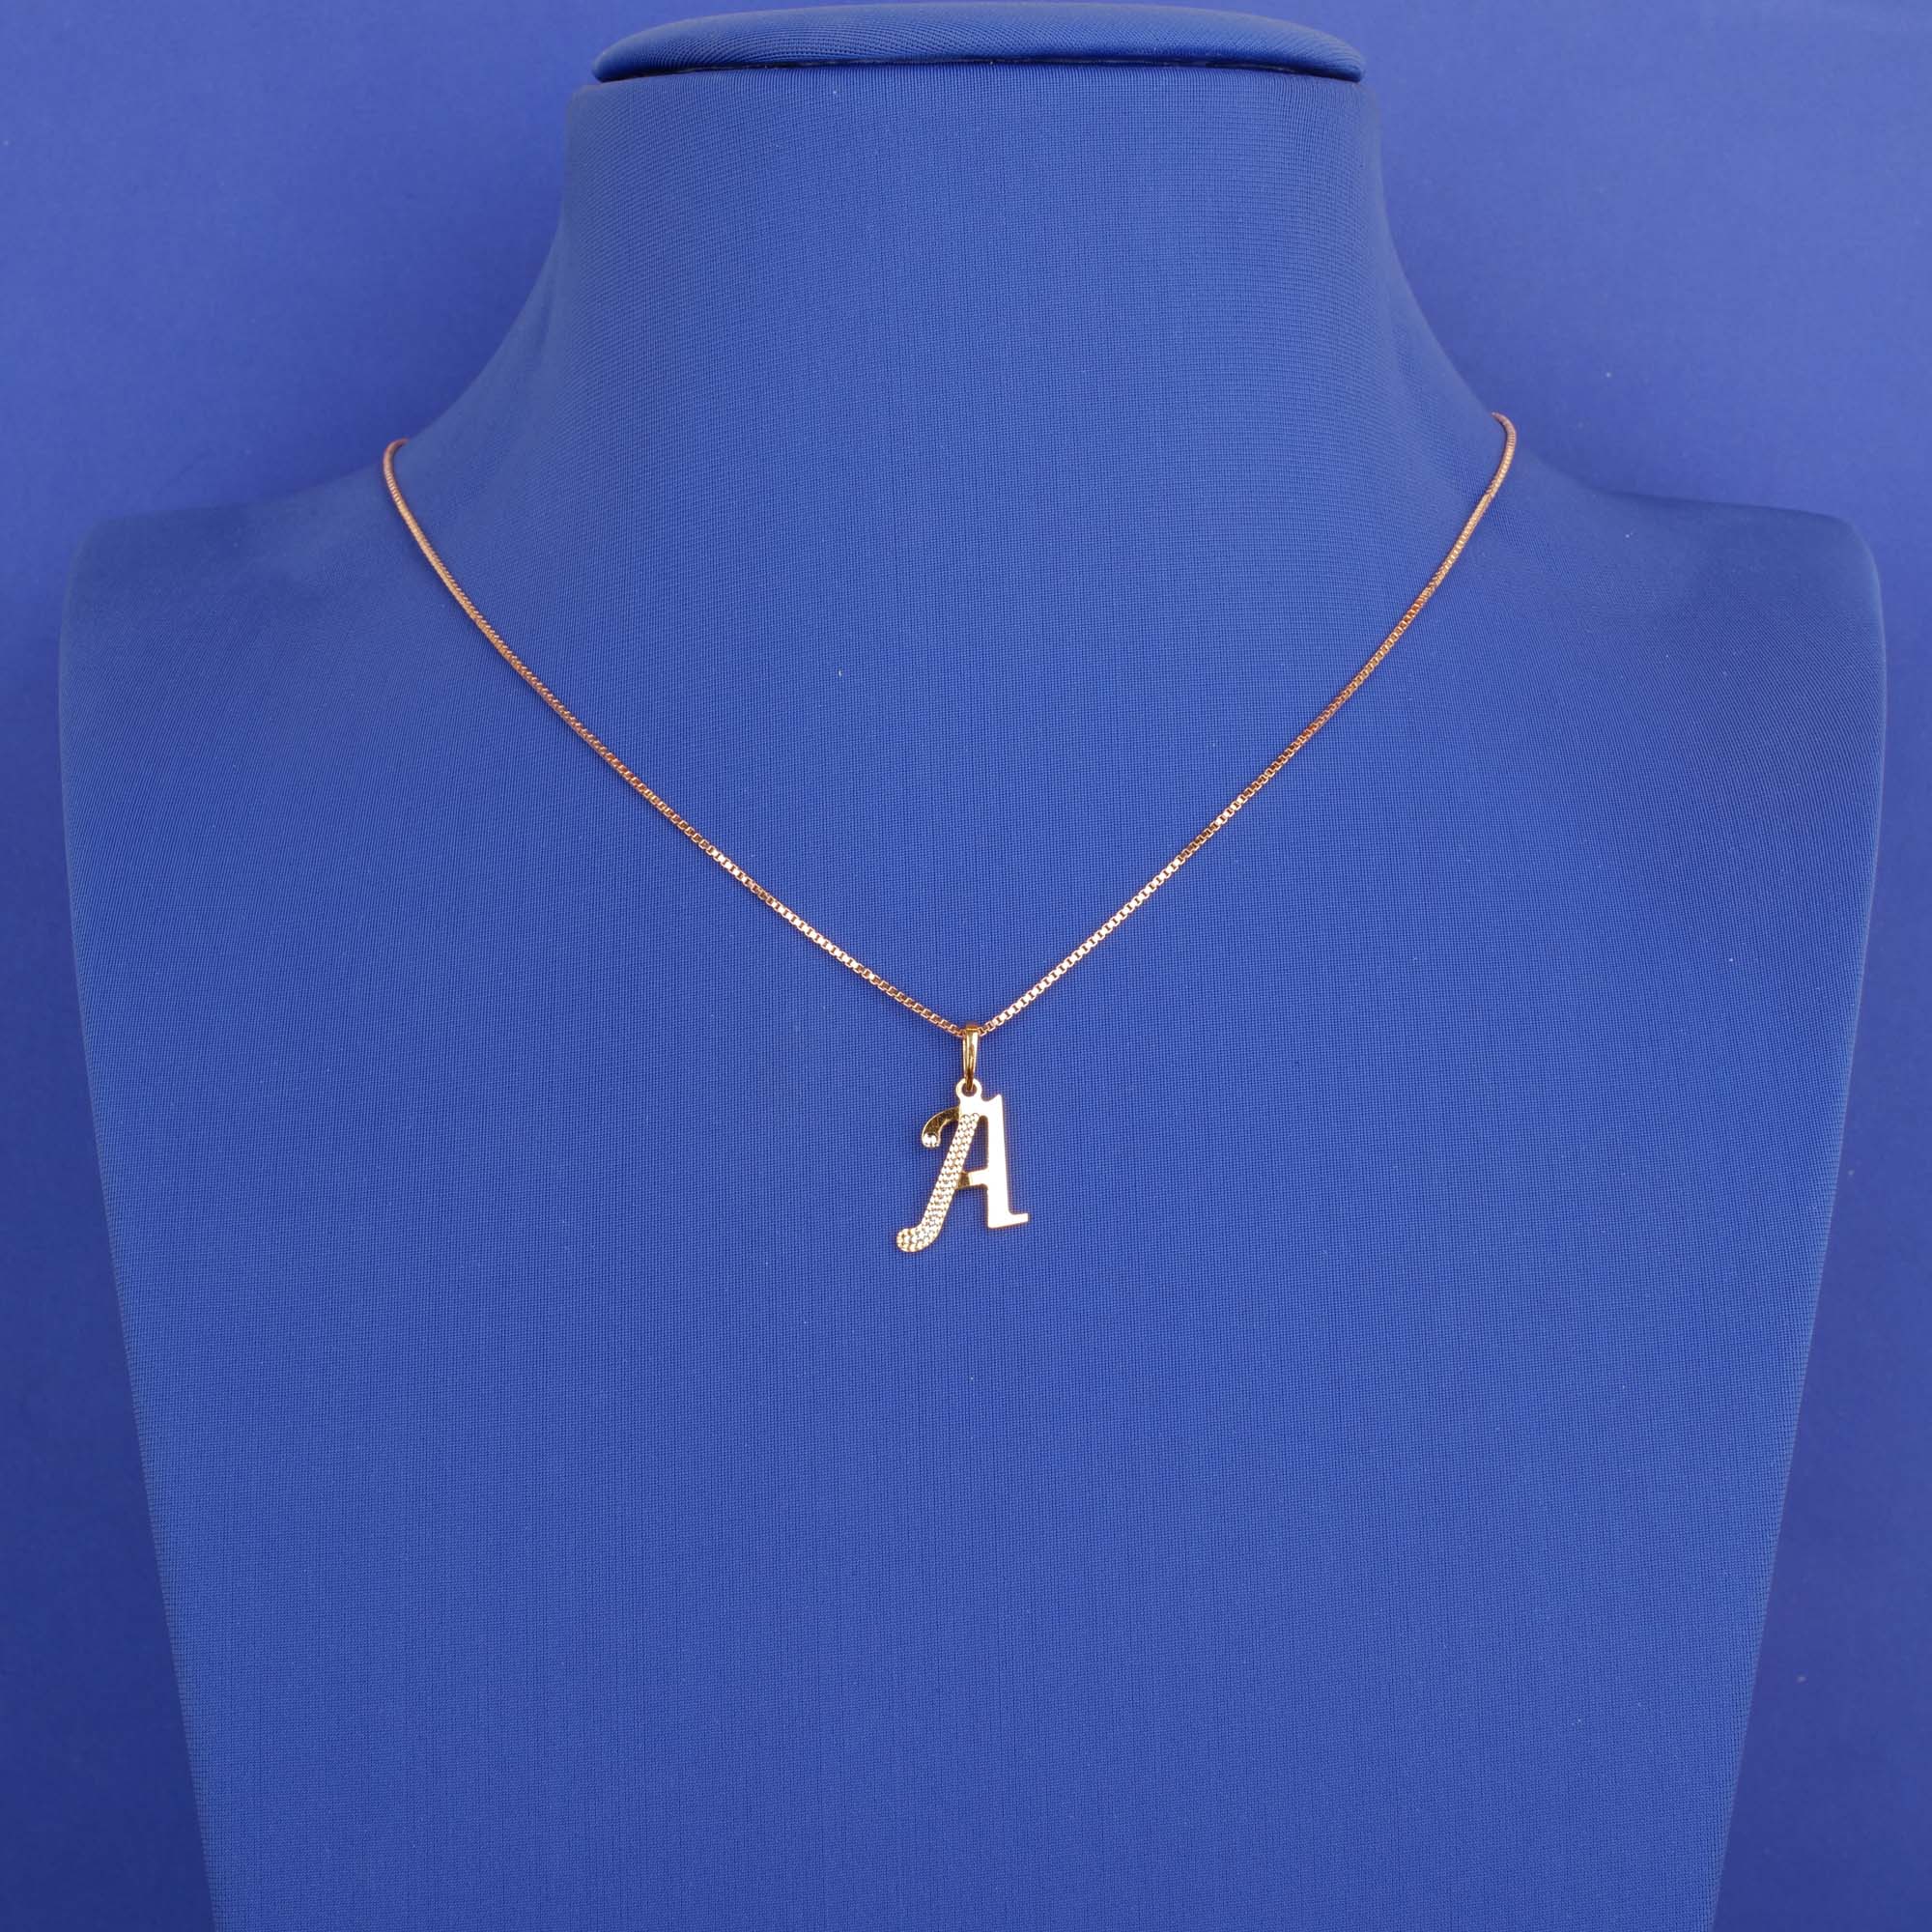 22K 'A' Tri-Color Pendant (chain not included)